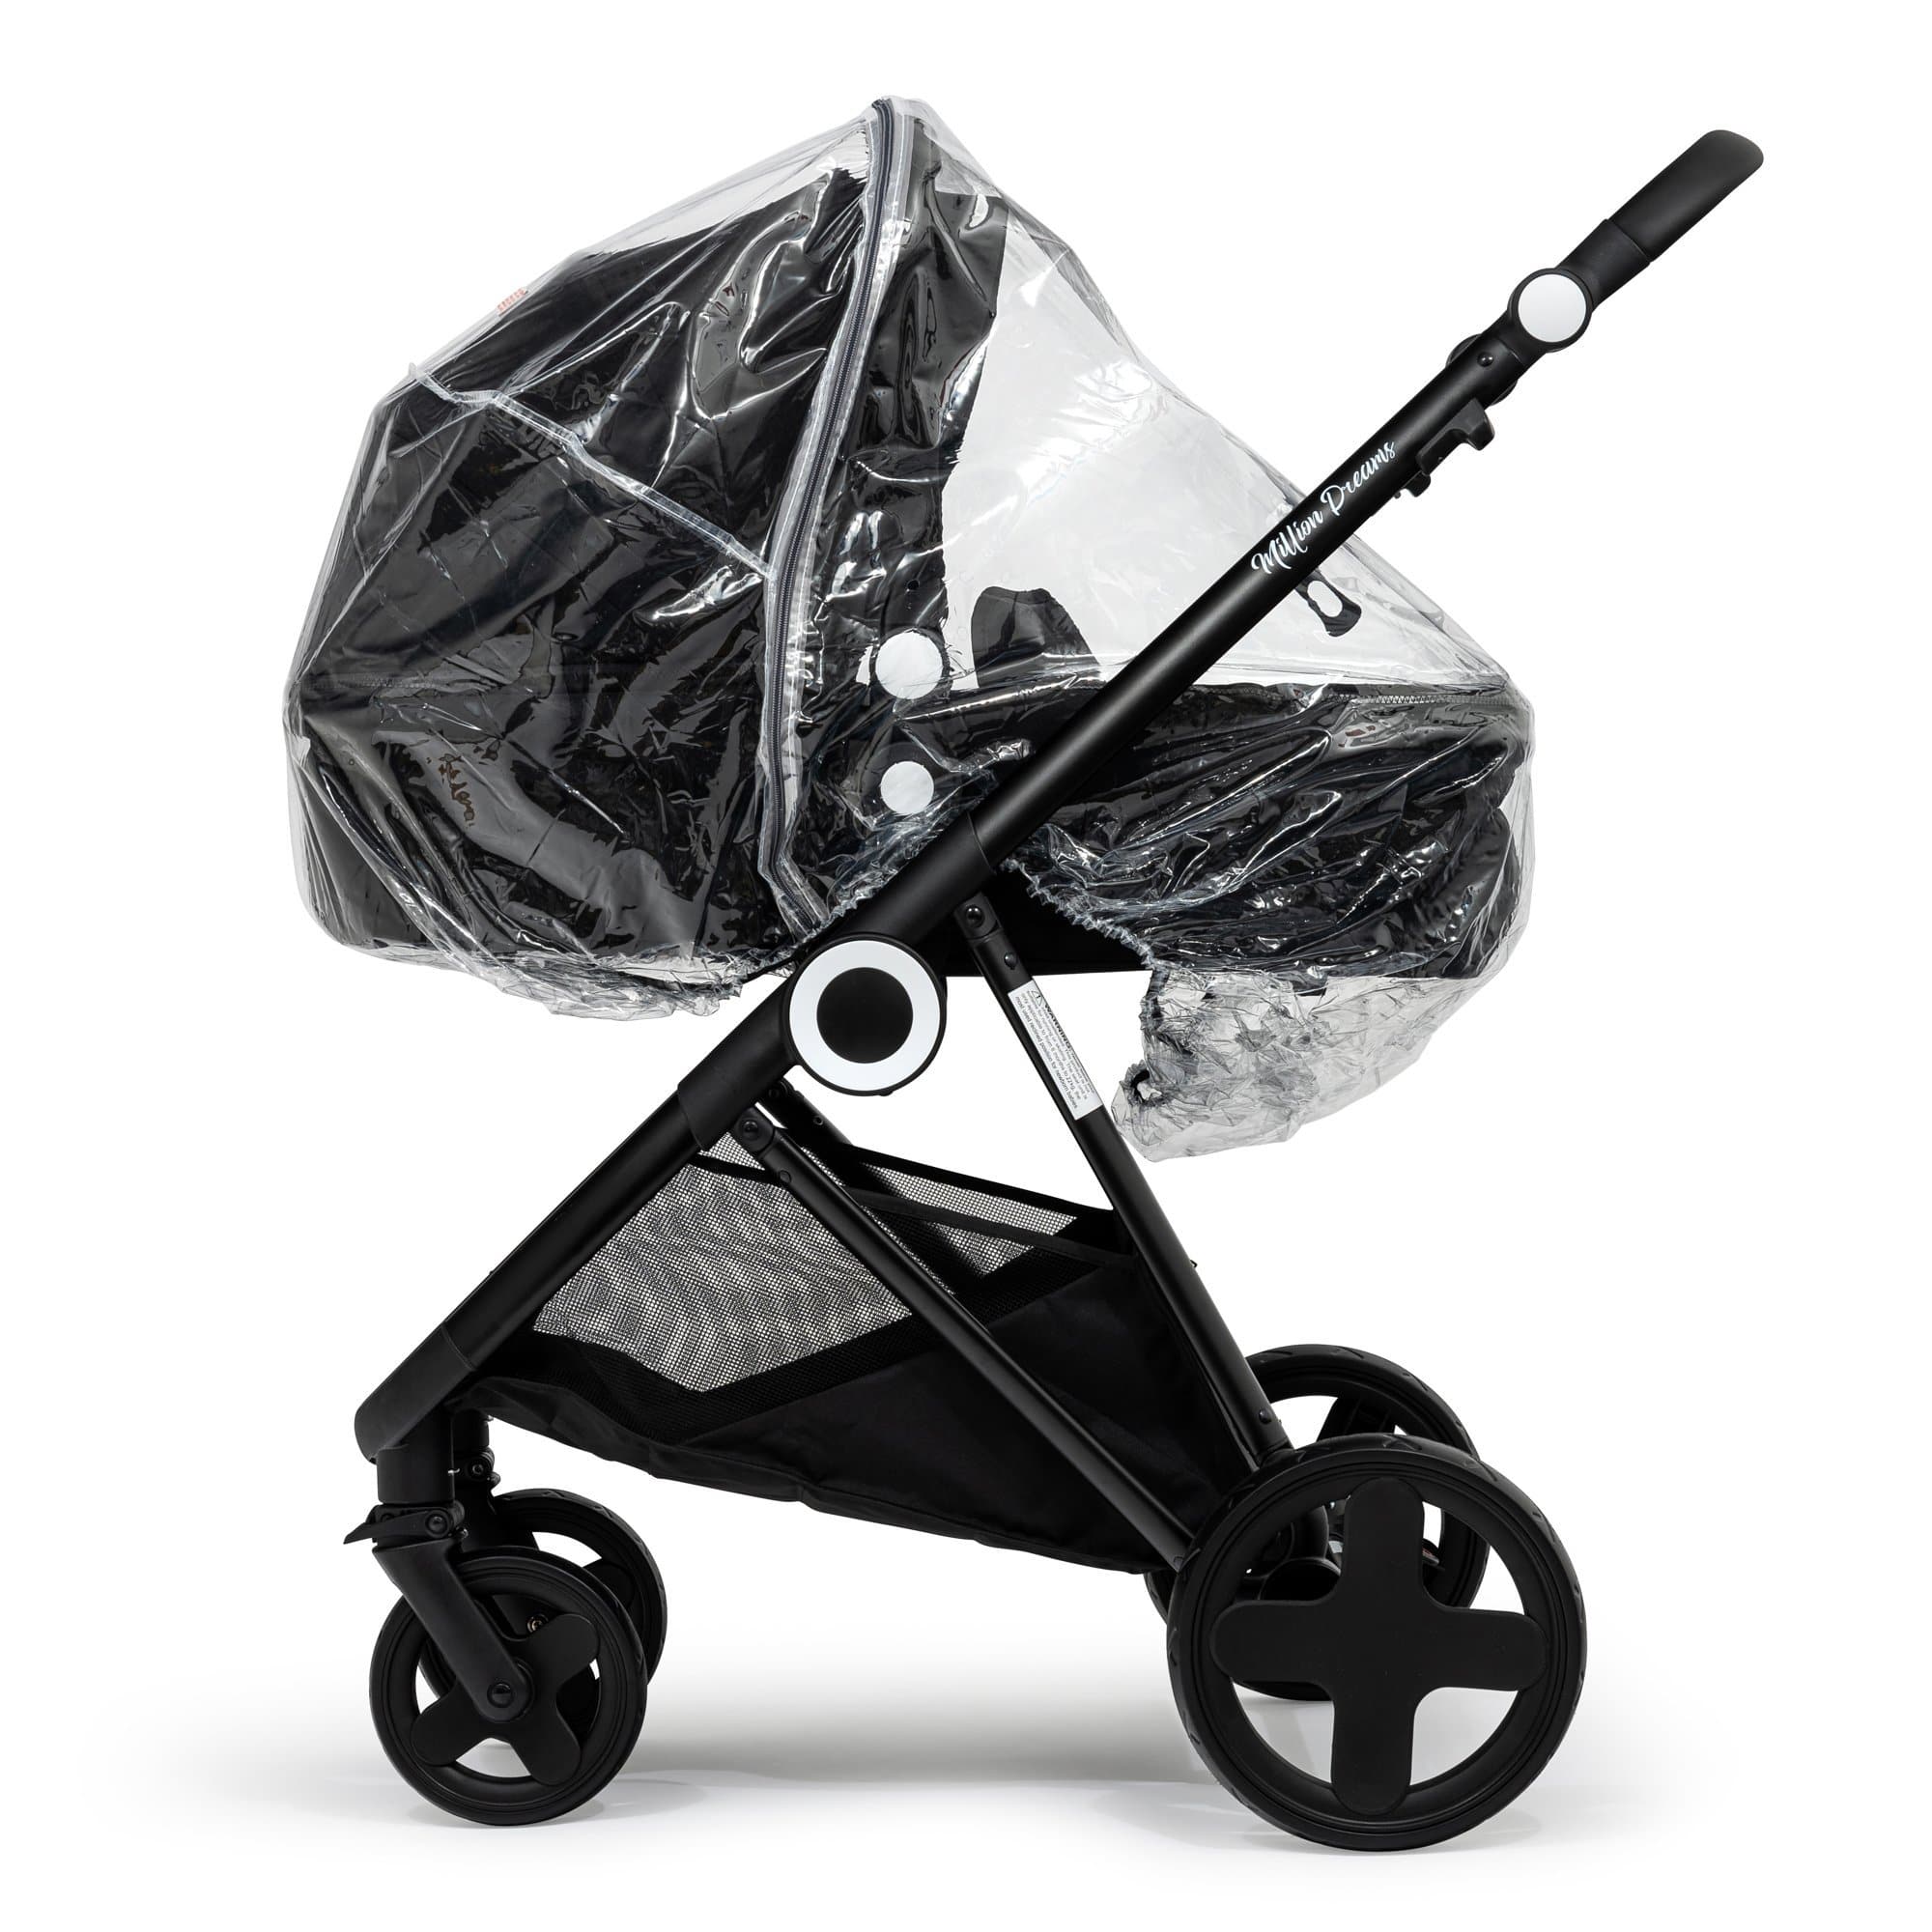 2 in 1 Rain Cover Compatible with Bloom - Fits All Models - For Your Little One